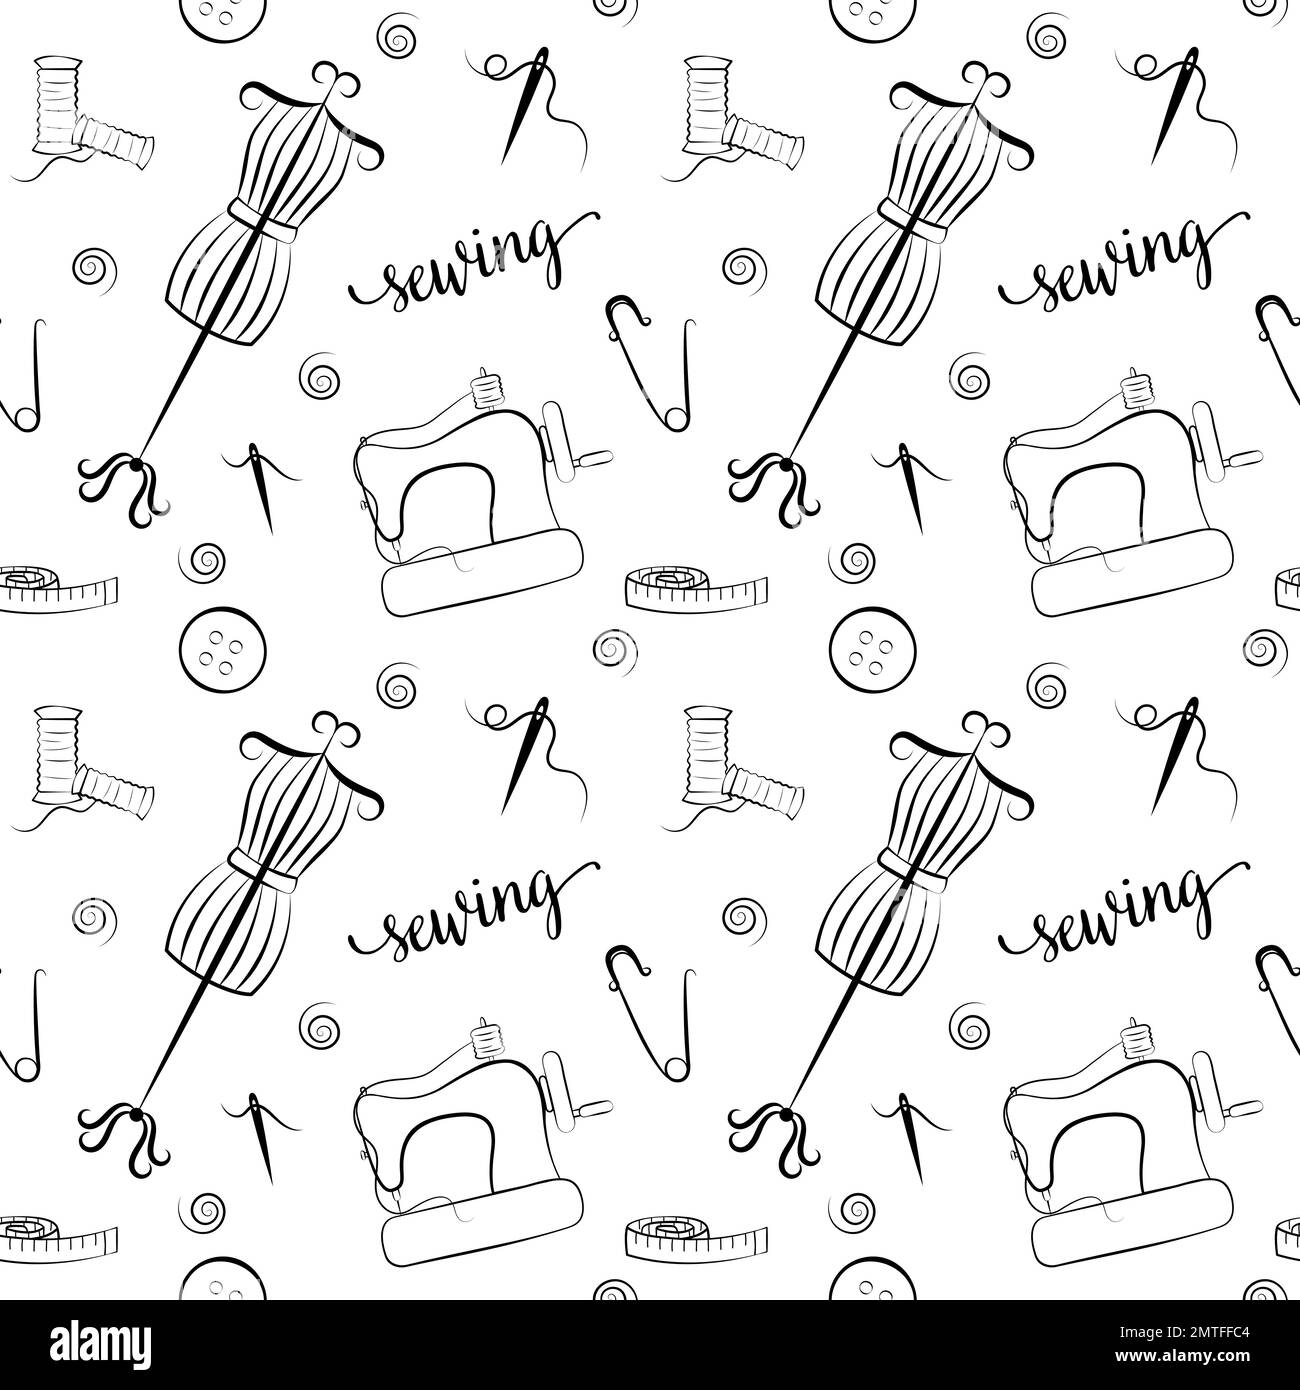 Sewing seamless pattern. Vector black and white background. Needlework illustrated elements. Various sewing tools outline. Embroidery and tailoring eq Stock Vector